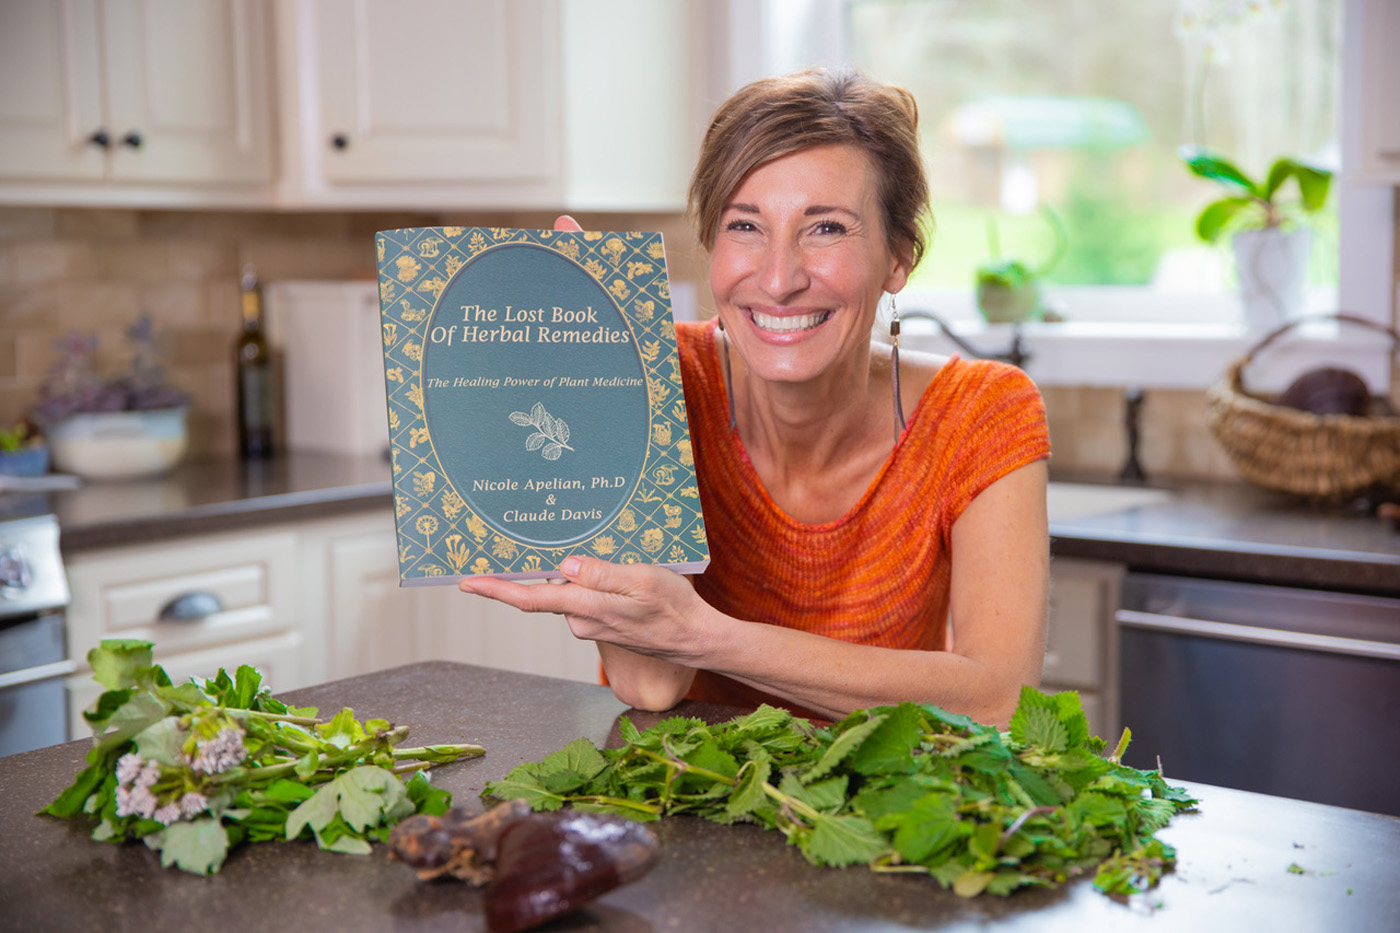 Nicole Apelian holding a copy of her book The Lost Book of Herbal Remedies